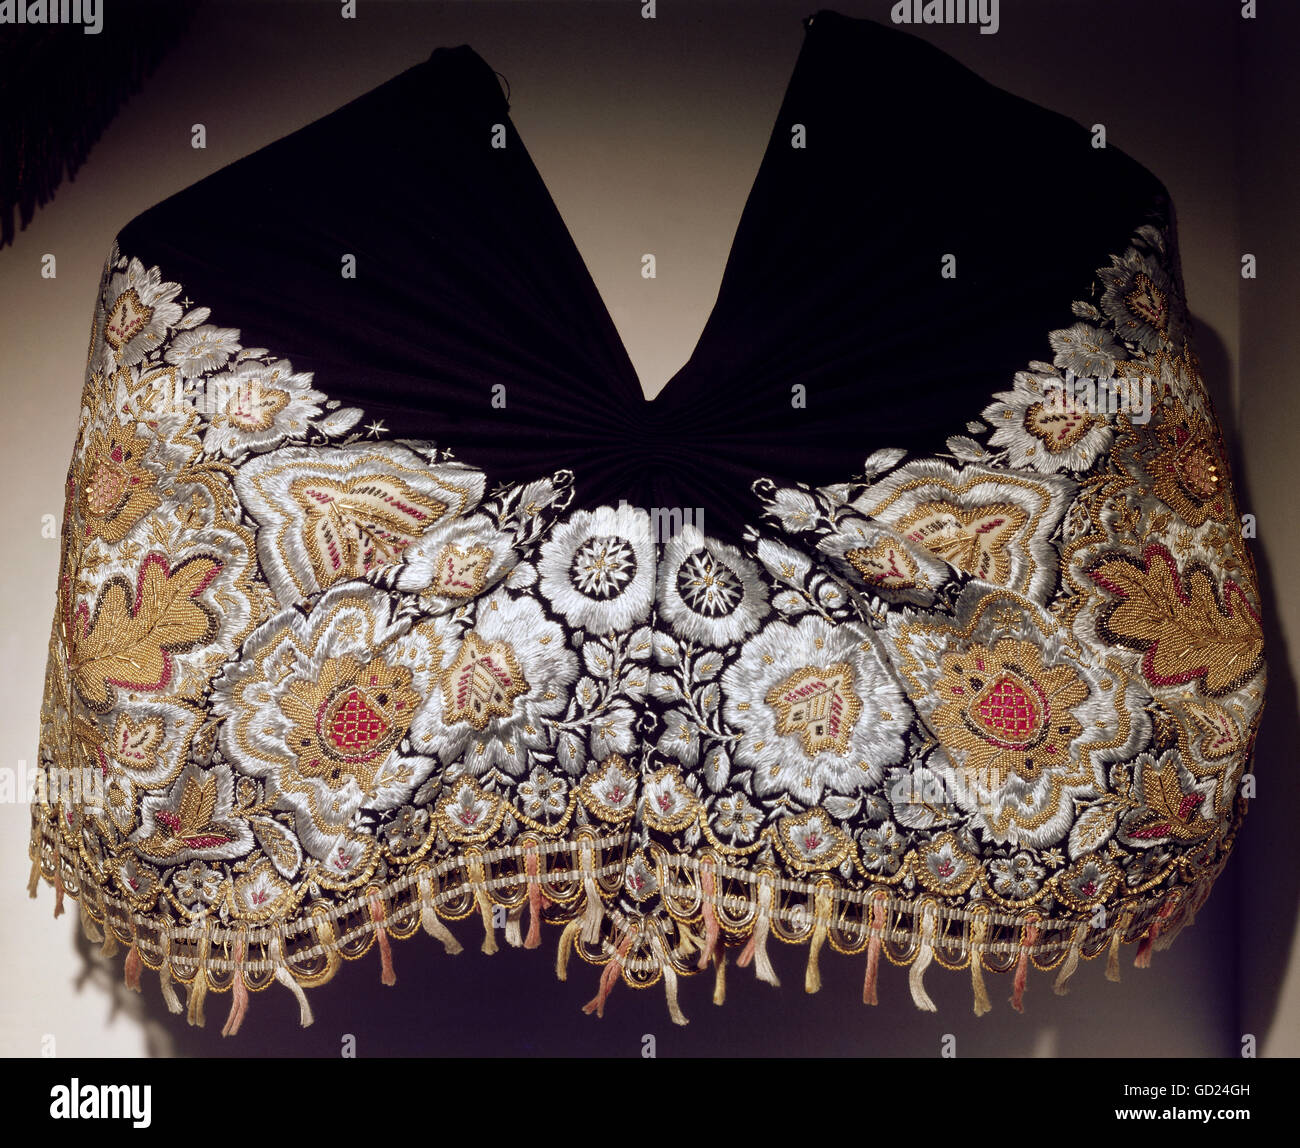 fine arts, embroidery, fichu, Lindhorst costume, Stadthagen, Lower Saxony, 19th century, Museum of European Cultures, Berlin, , Artist's Copyright has not to be cleared Stock Photo